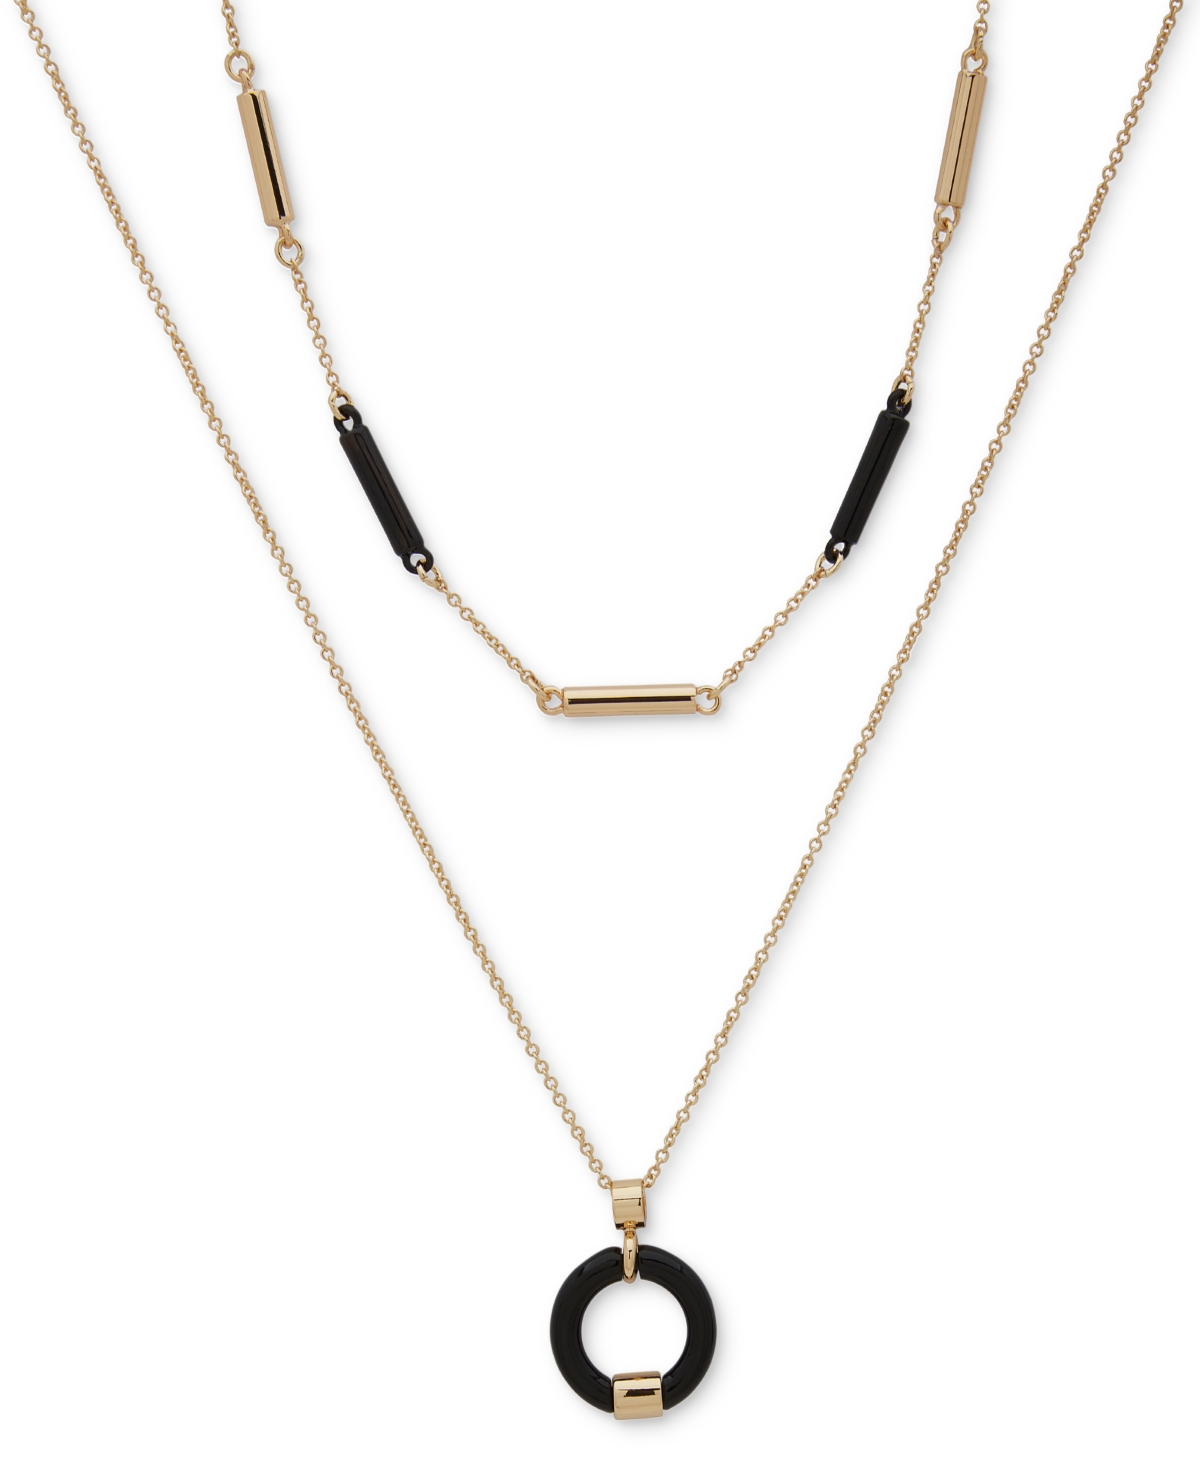 Dkny Gold-tone Black Bar & Circle Layered Pendant Necklace, 16" + 3" Extender In Jet